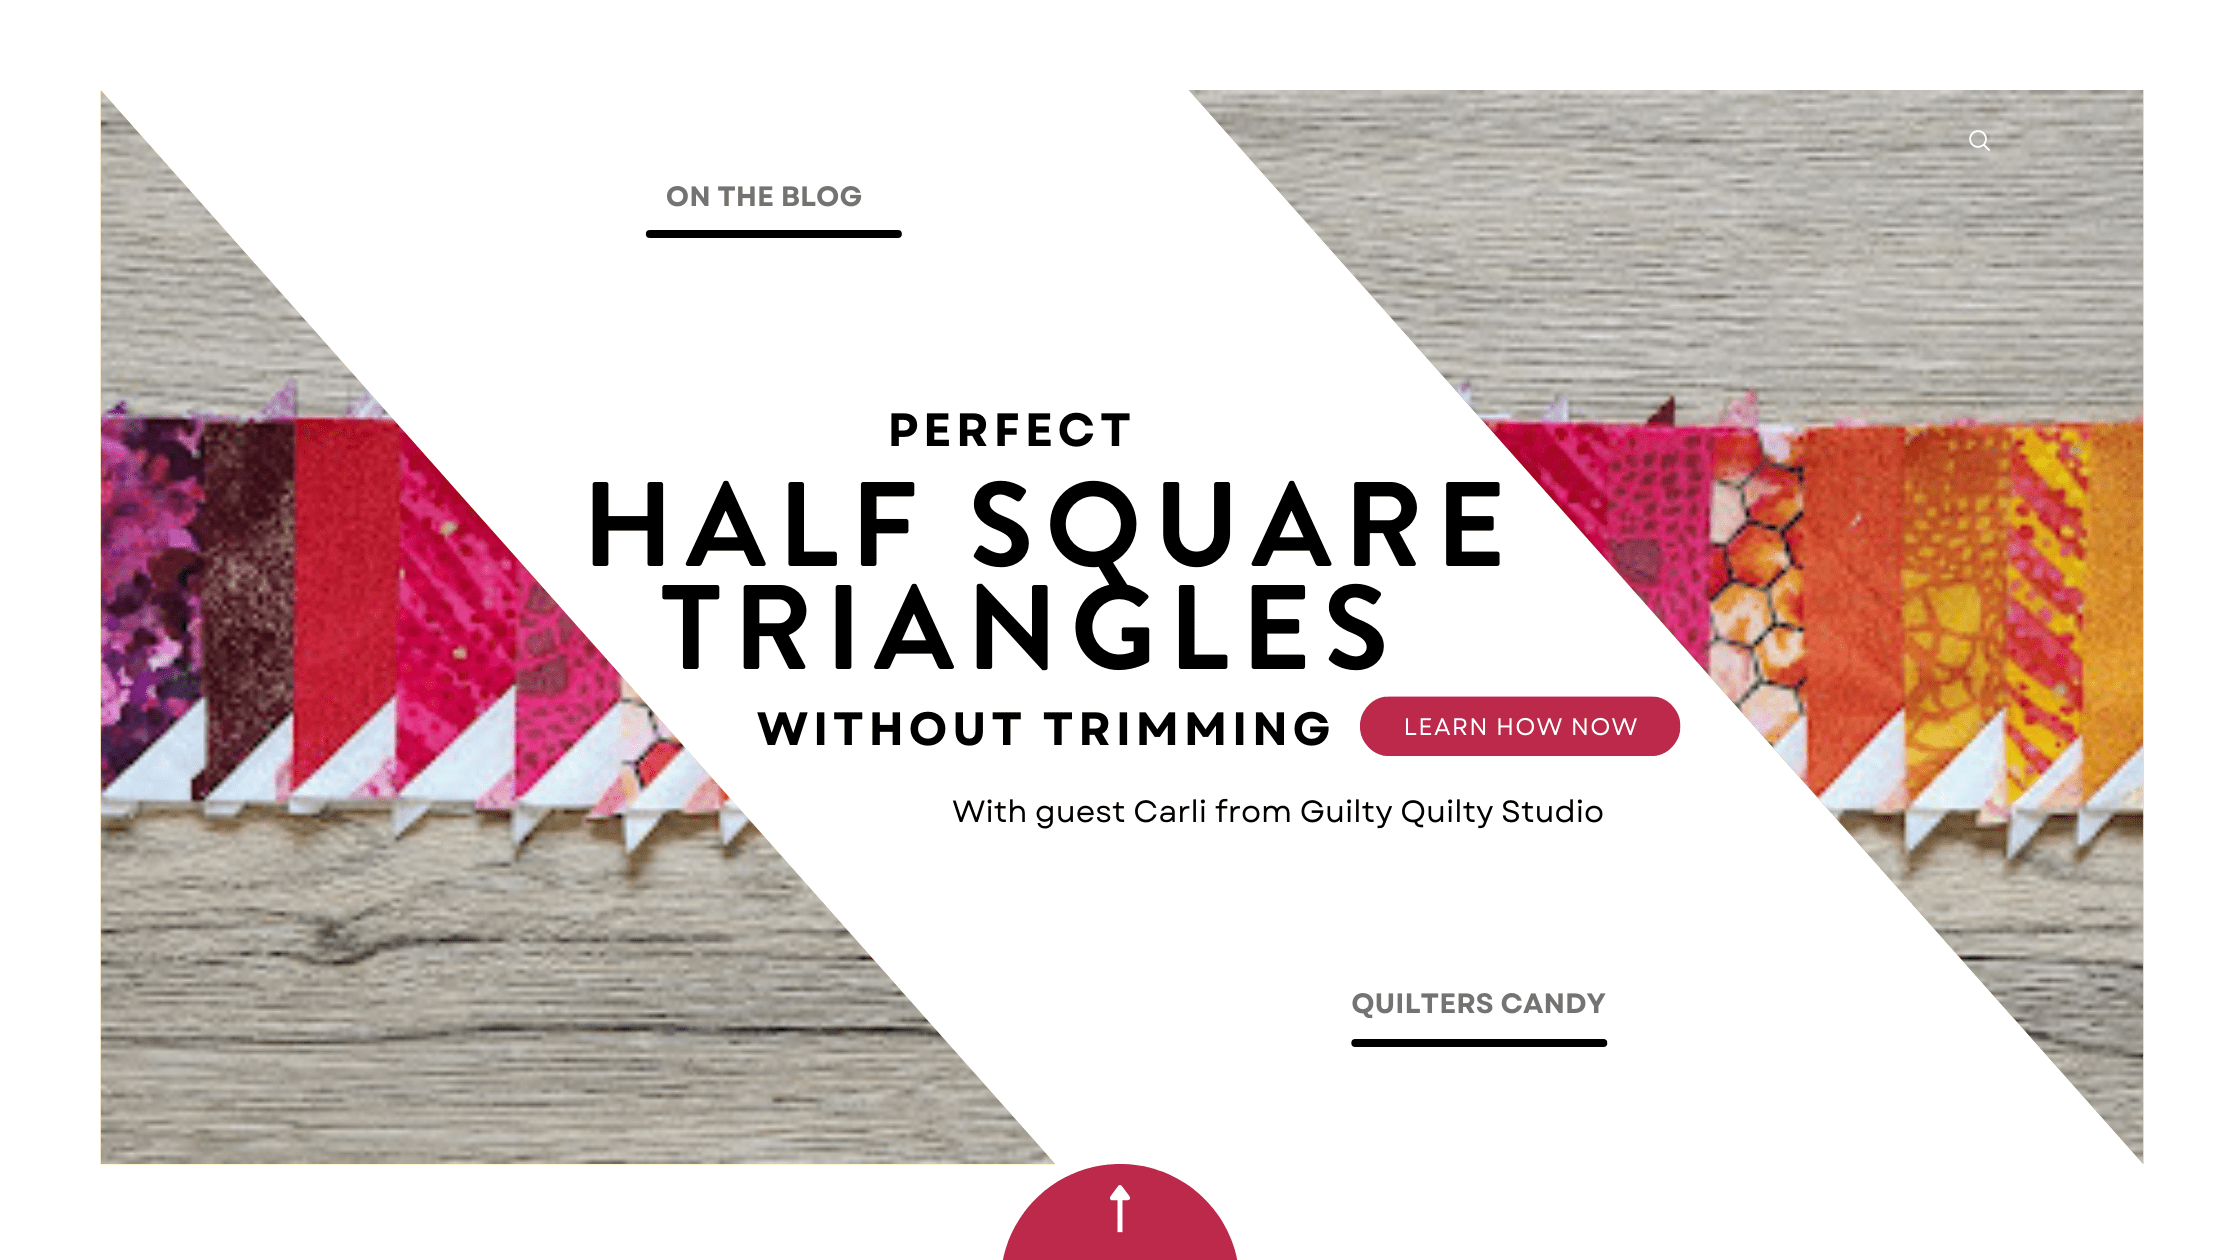 Perfect Half Square Triangles Without Trimming Blog banner